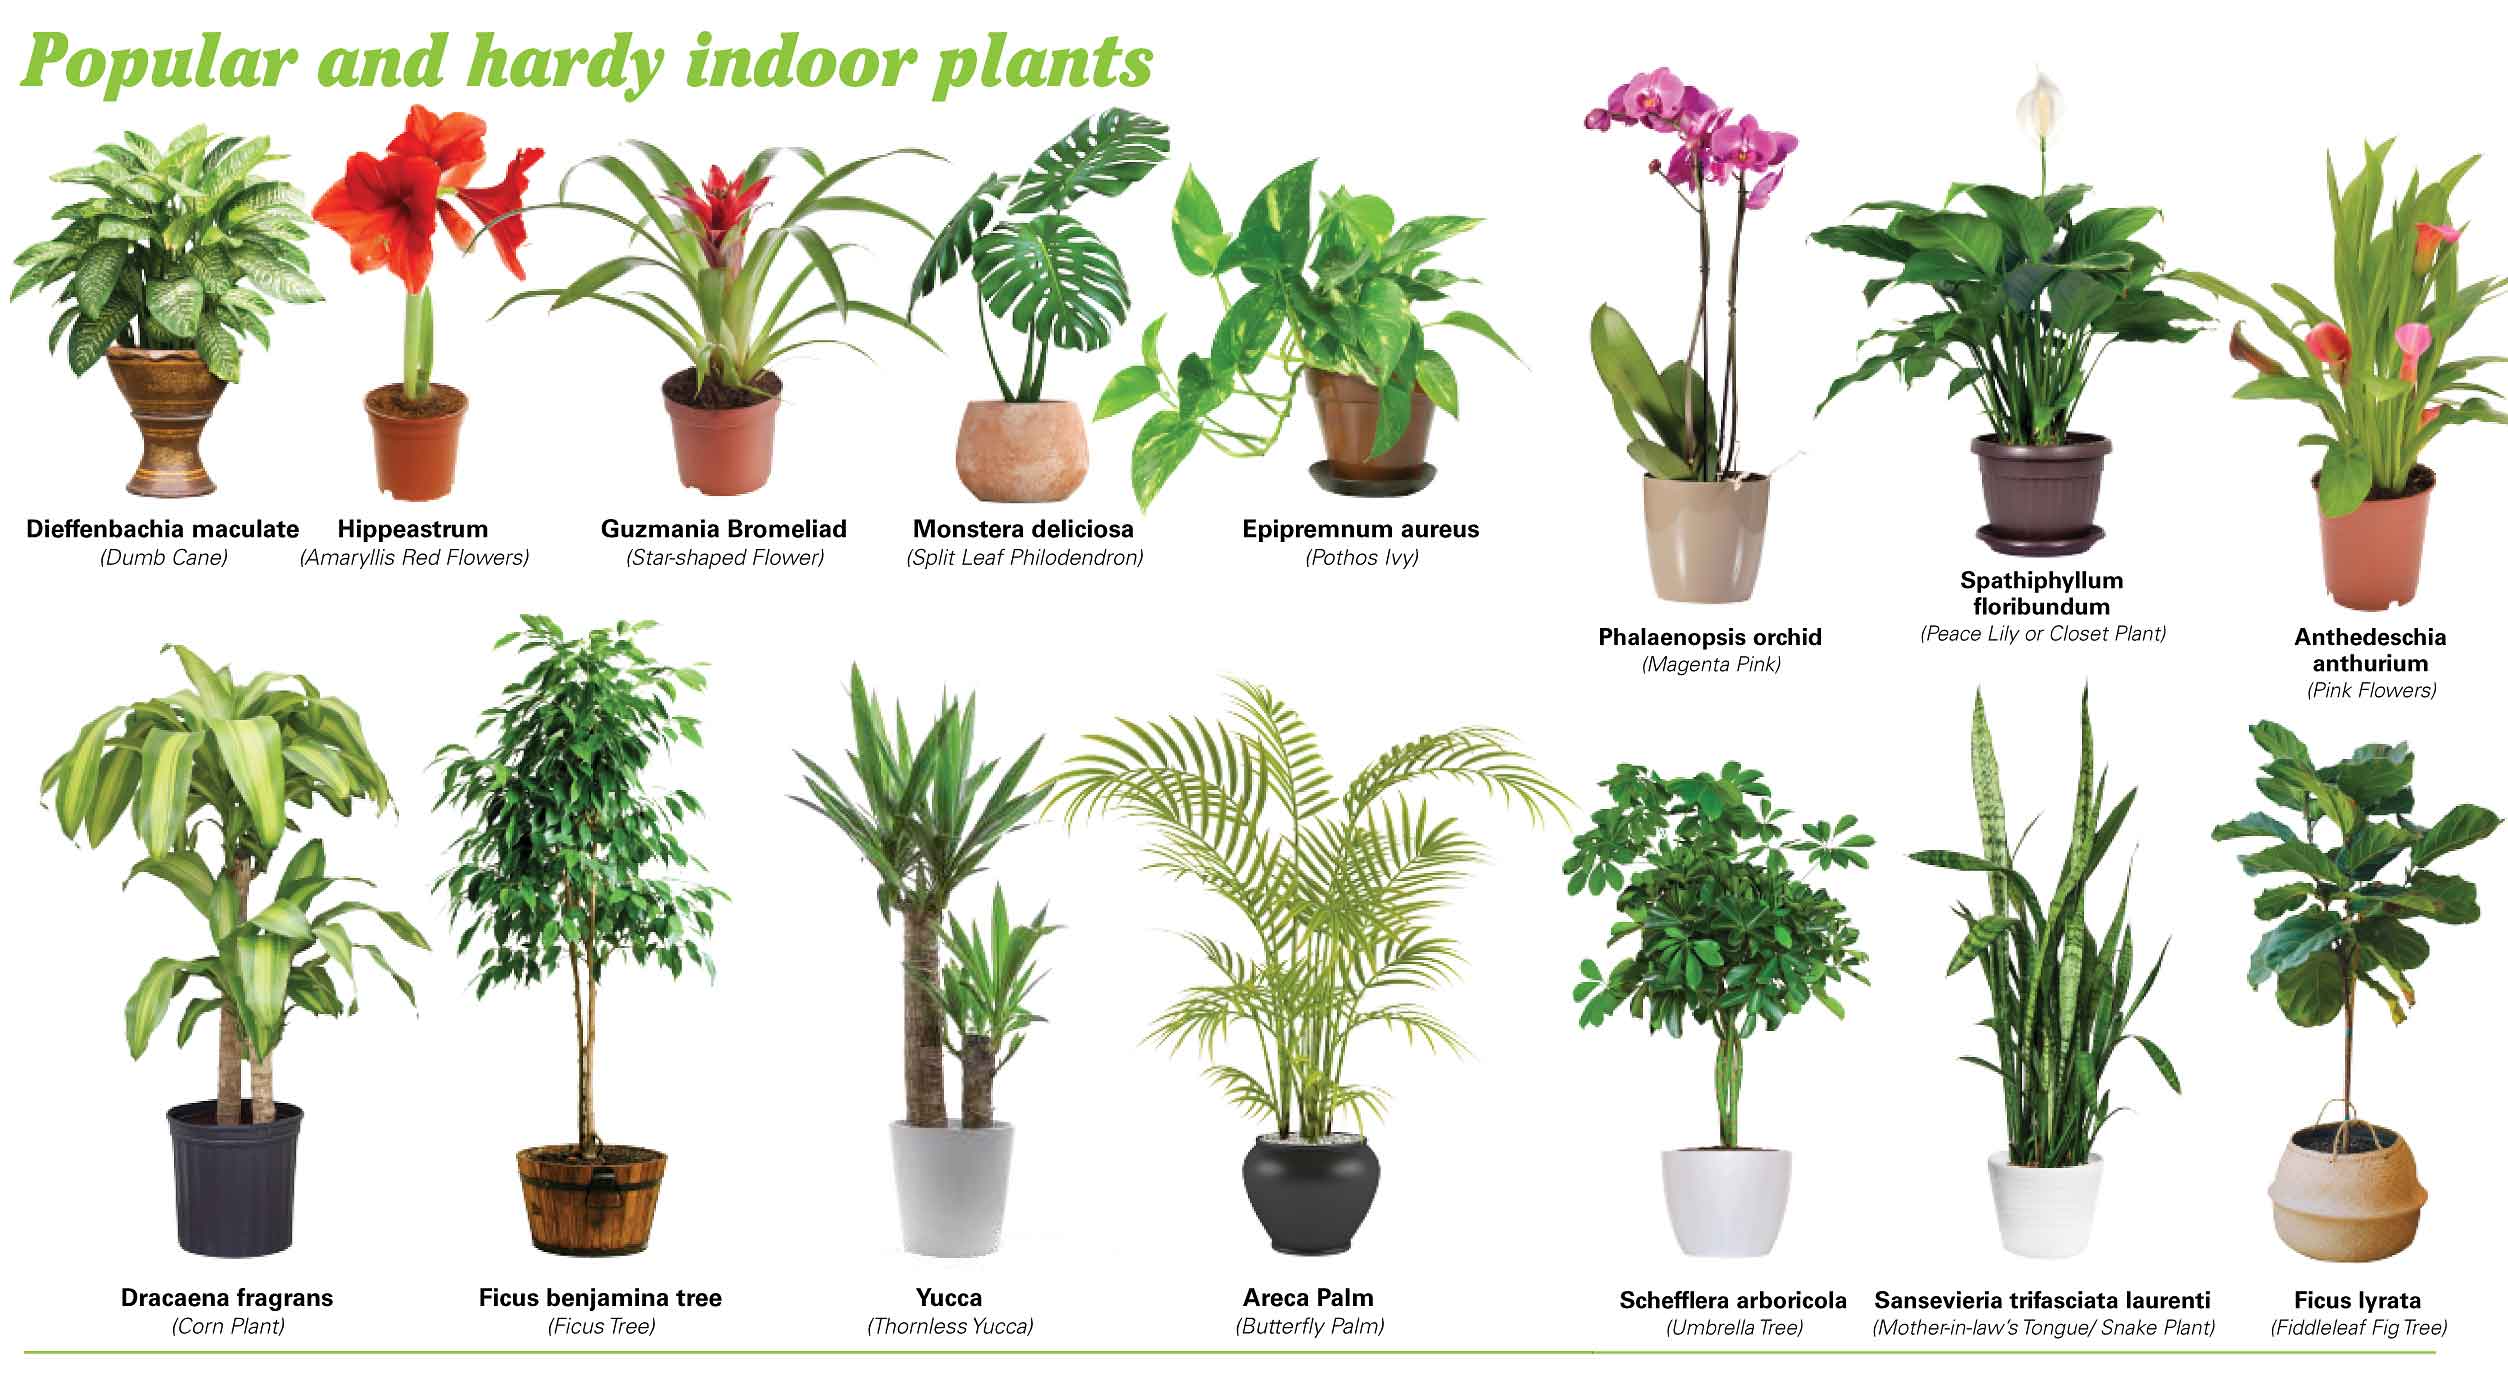 Which Indoor Plants Produces Most Oxygen? - Find Health Tips